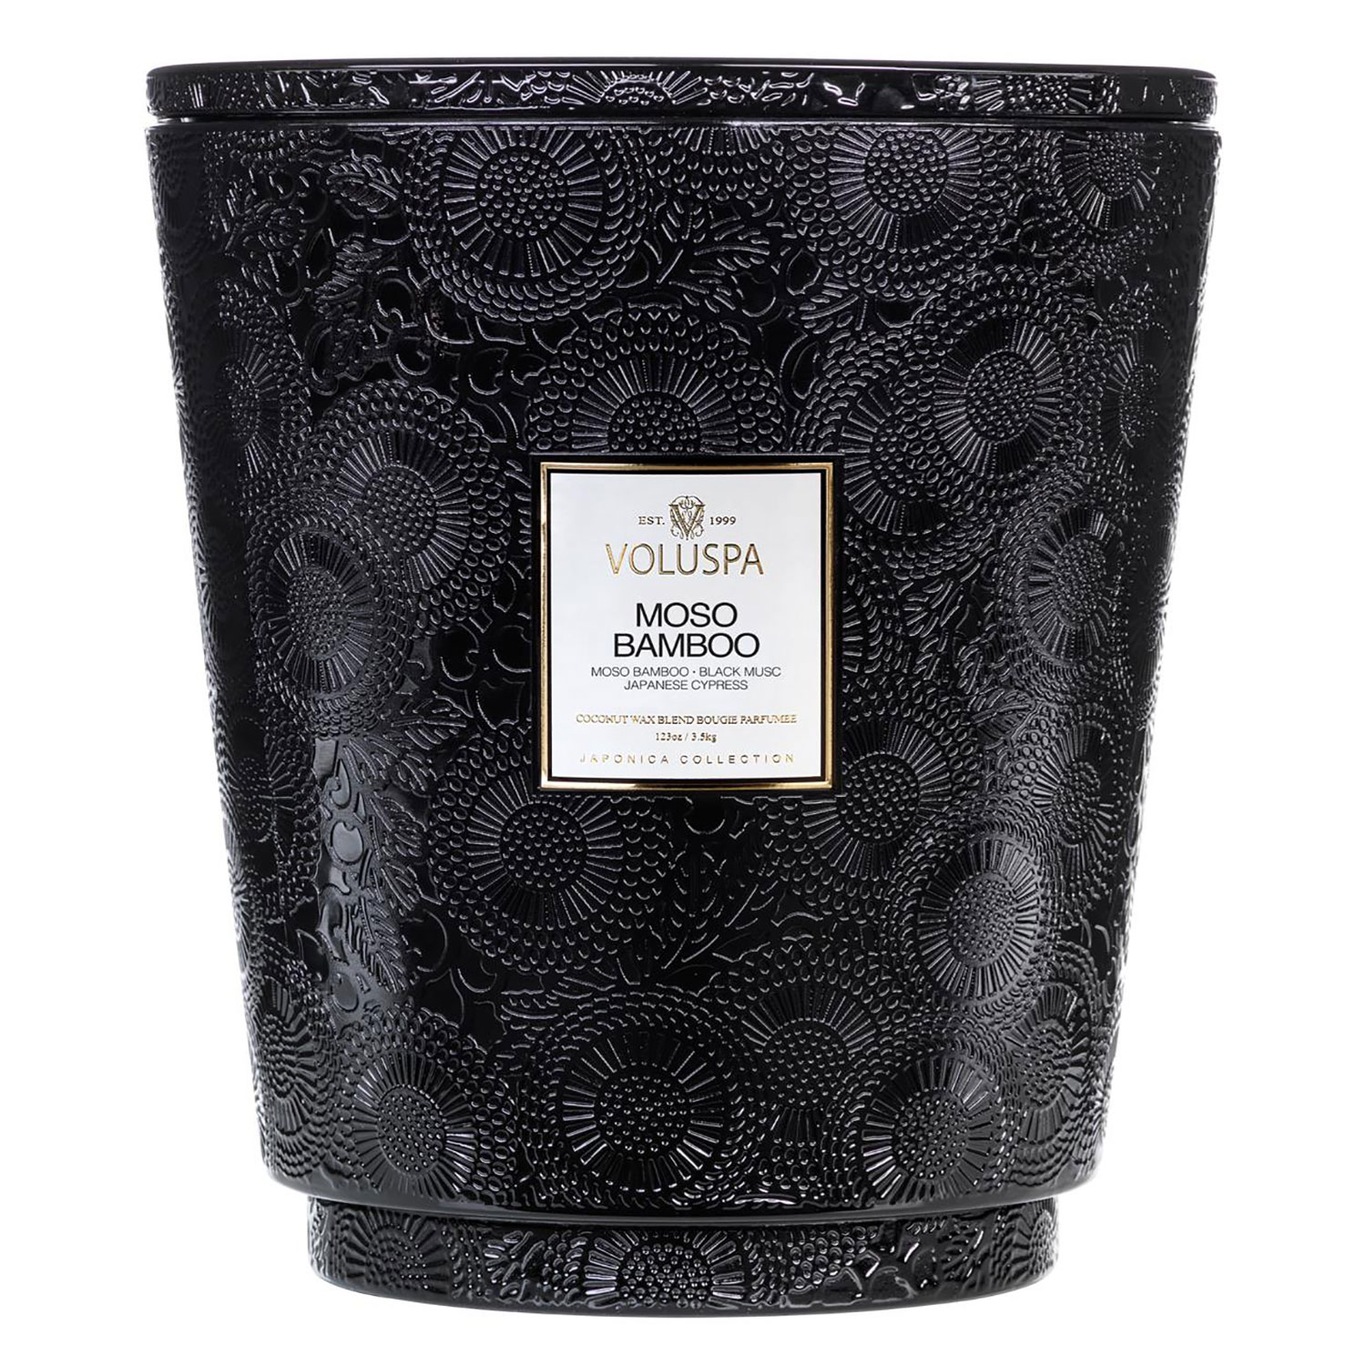 Japonica Hearth Scented Candle, Moso Bamboo